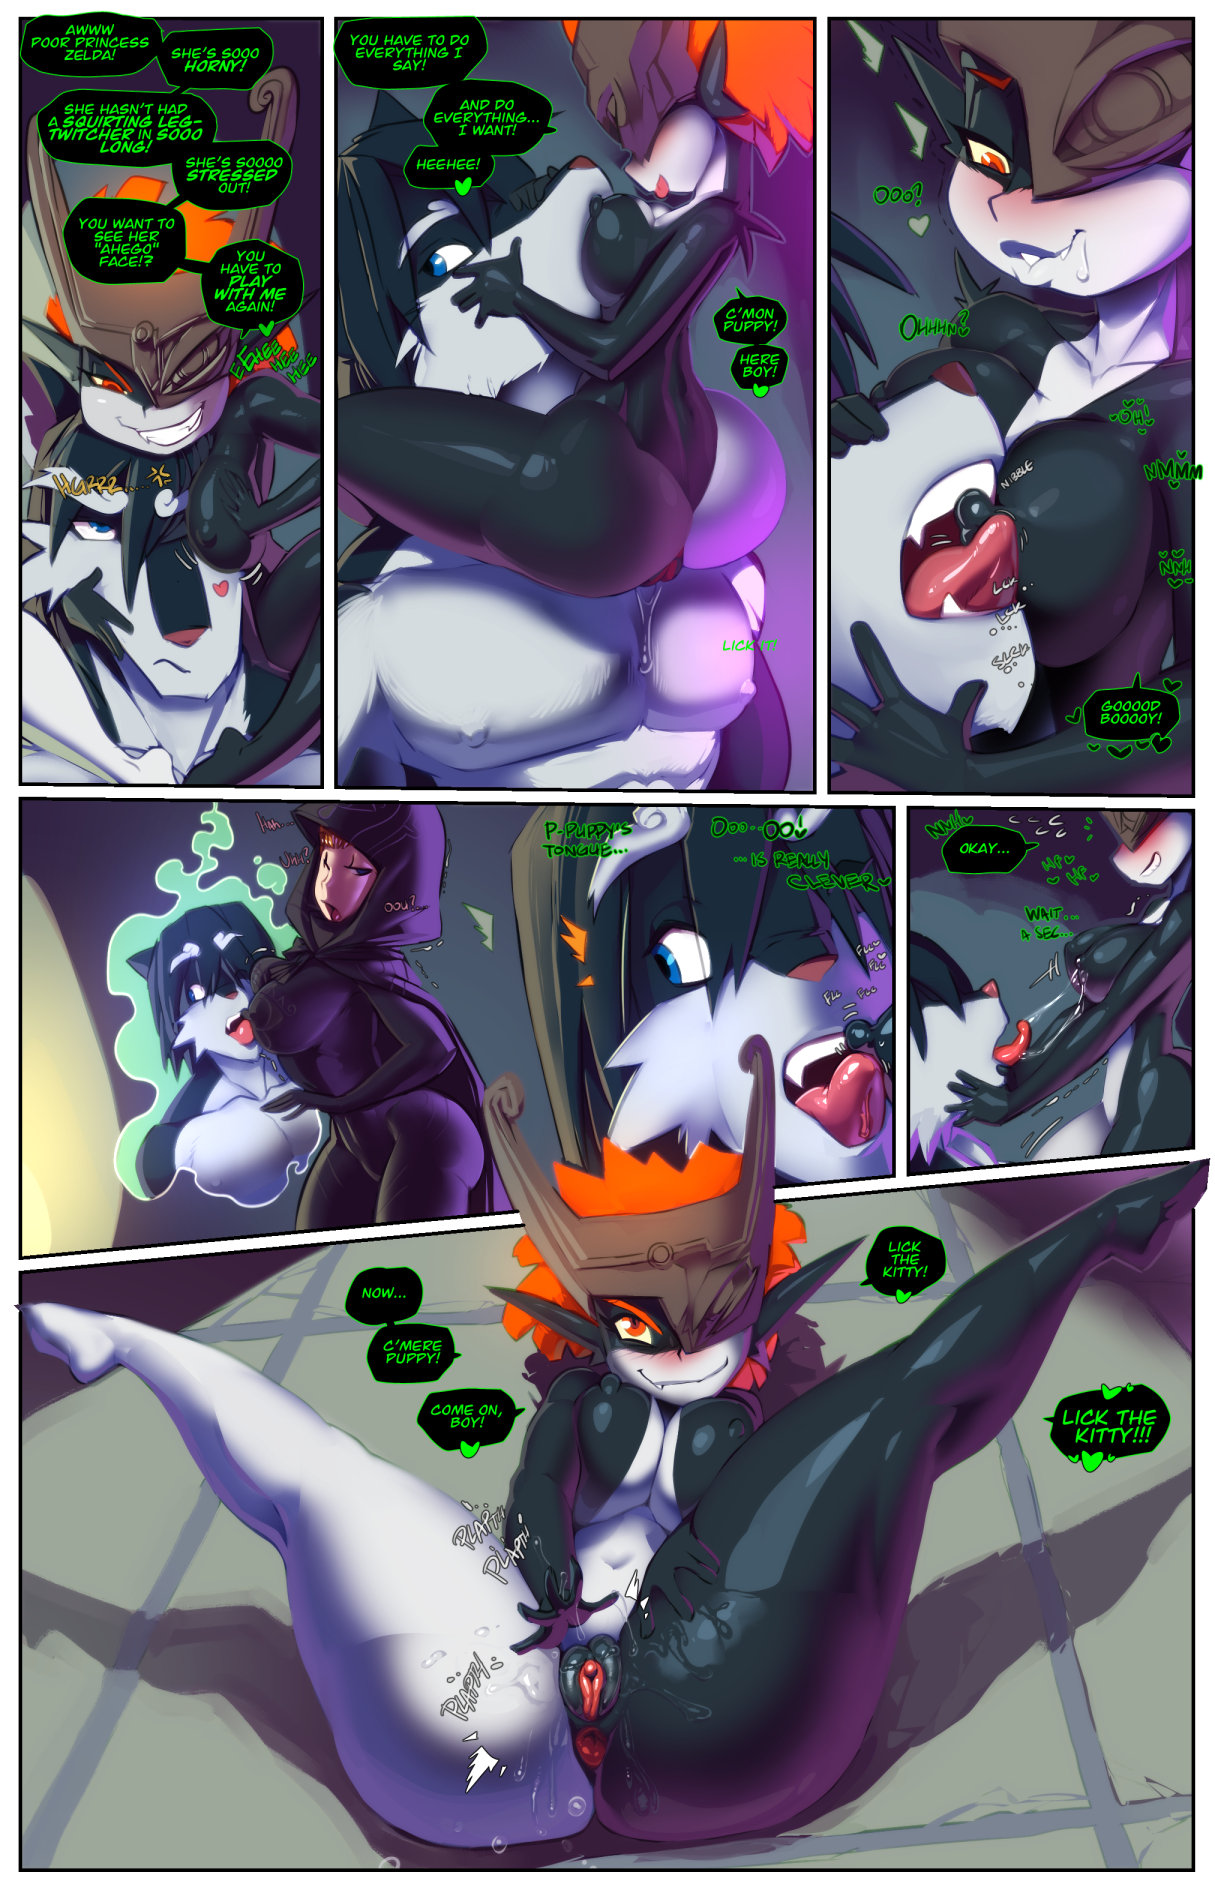 Midna Hentai Porn - Midna's Link - Fred Perry - KingComiX.com